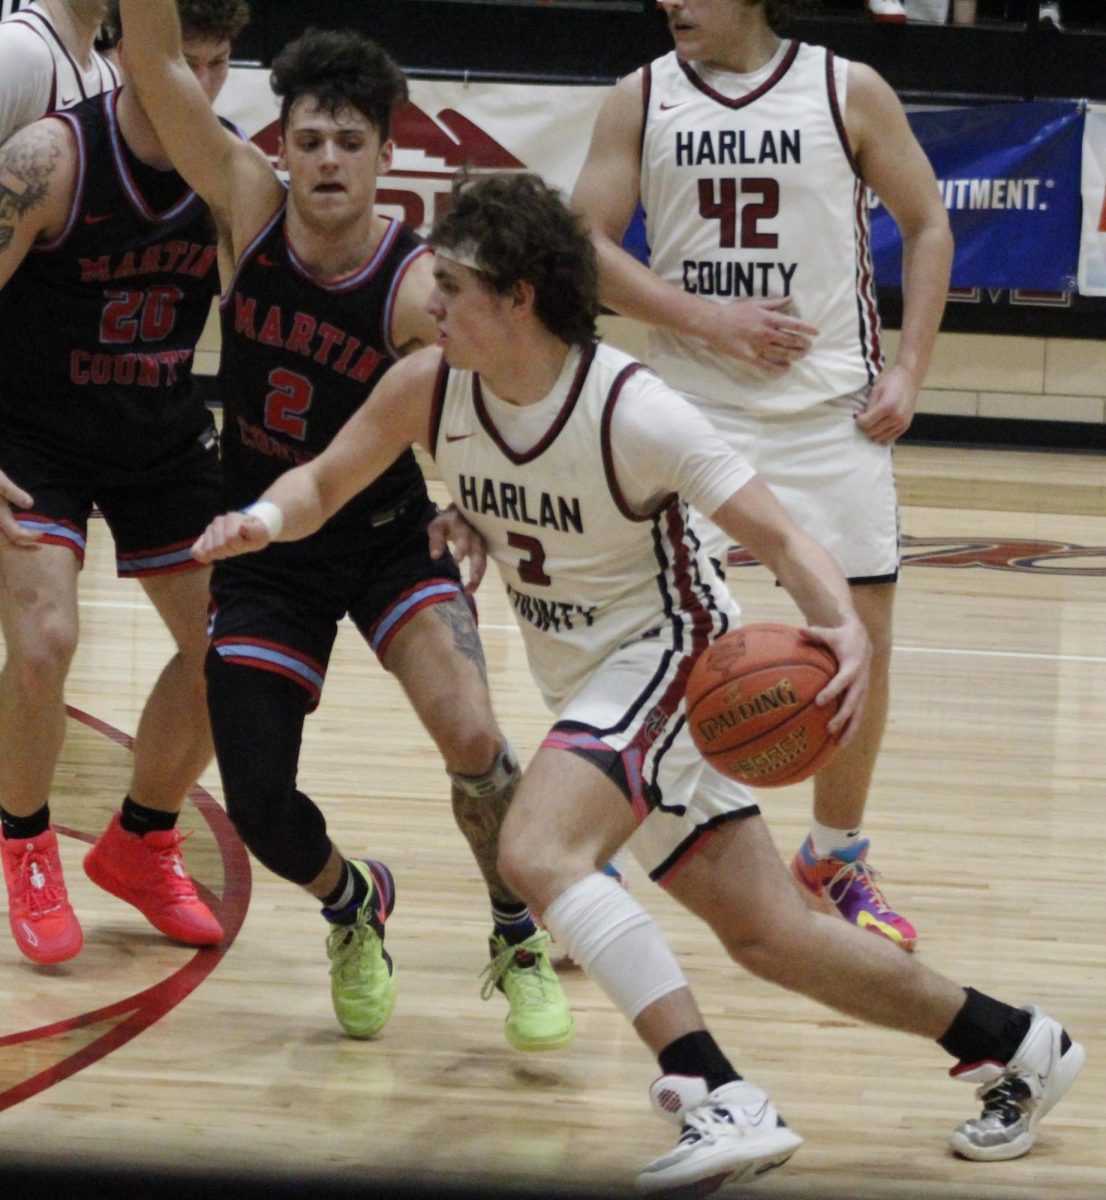 Harlan County junior guard Maddox Huff drove around Martin Countys Luke Hale in action from the WYMT Mountain Classic on Friday. The Bears advanced with an 86-76 victory and will play Perry Central on Saturday in the tournament finals.